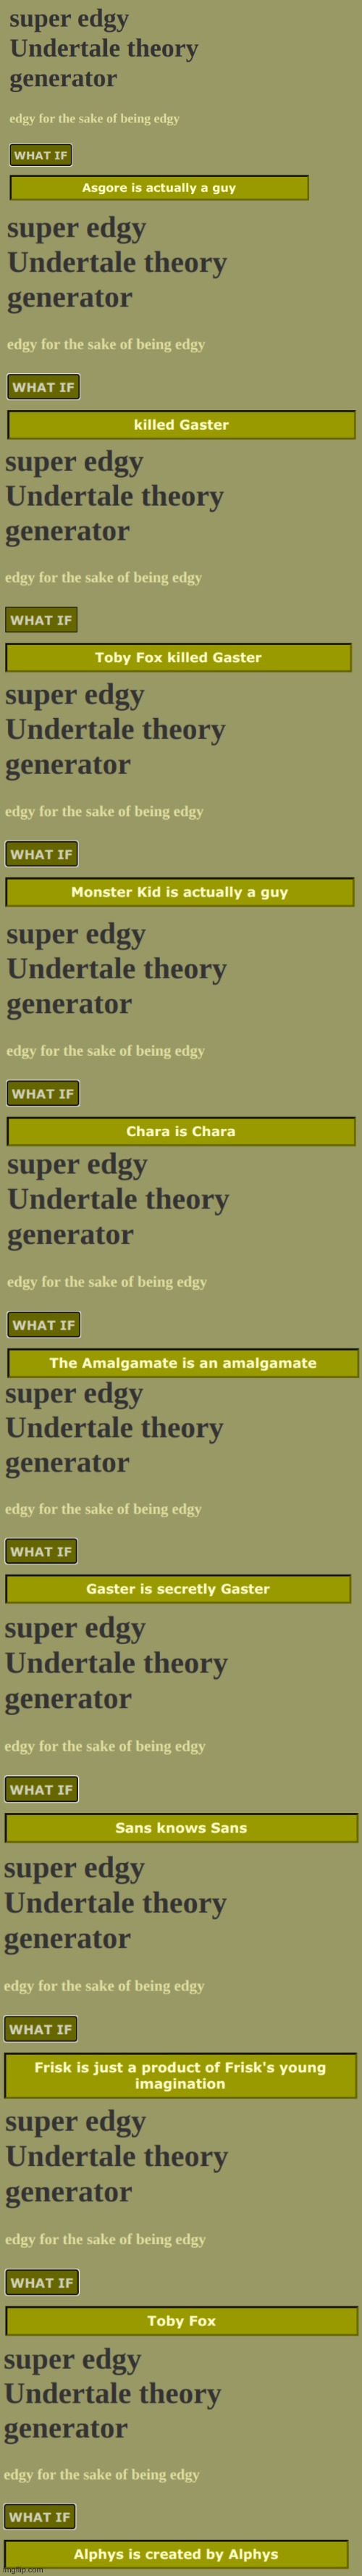 this is some undertale theory generator outcomes that i thought were funny | image tagged in super edgy undertale theory generator | made w/ Imgflip meme maker